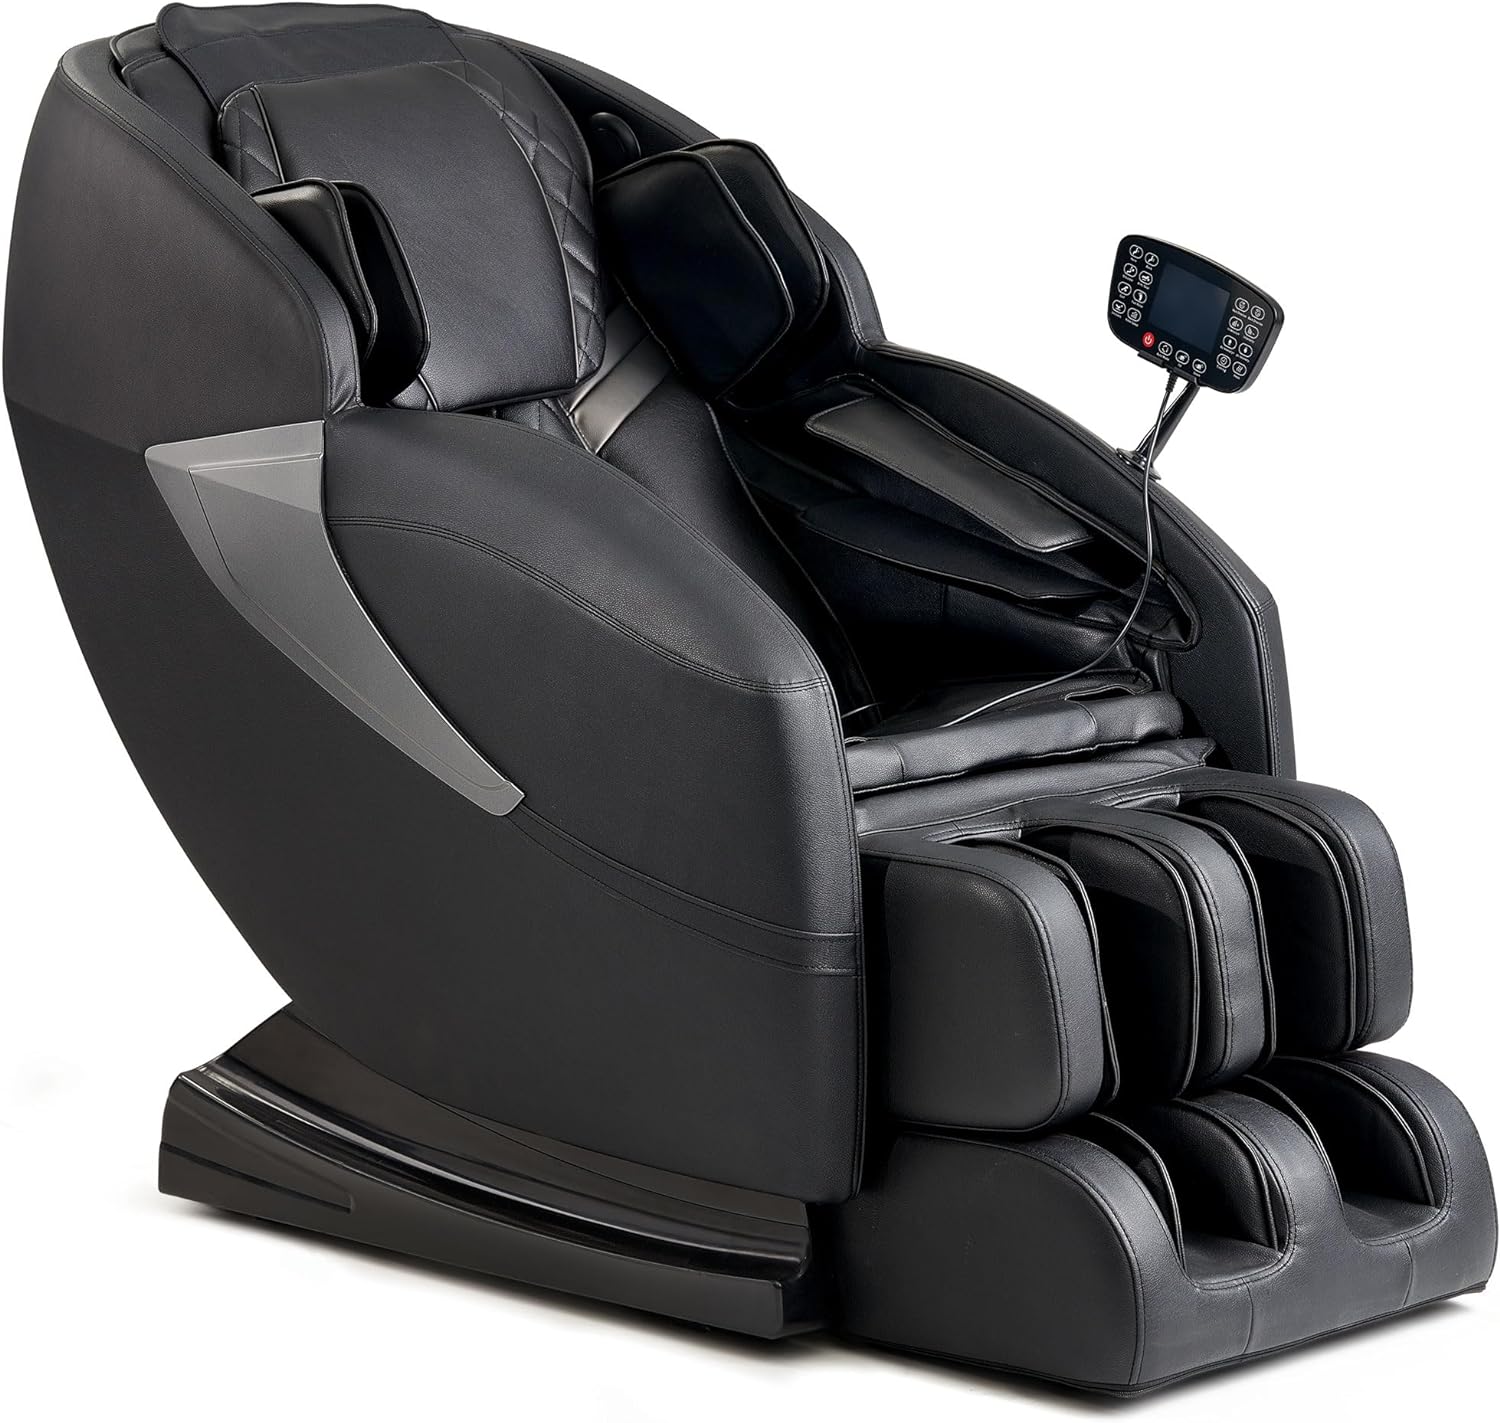 Mazzup Massage Chair, Zero Gravity Shiatsu Massage Chair Full Body And  Recliner With Fully Assembled, LCD Screen, Lower Back And Calf Heating, Air, Shiatsu Massage Chair